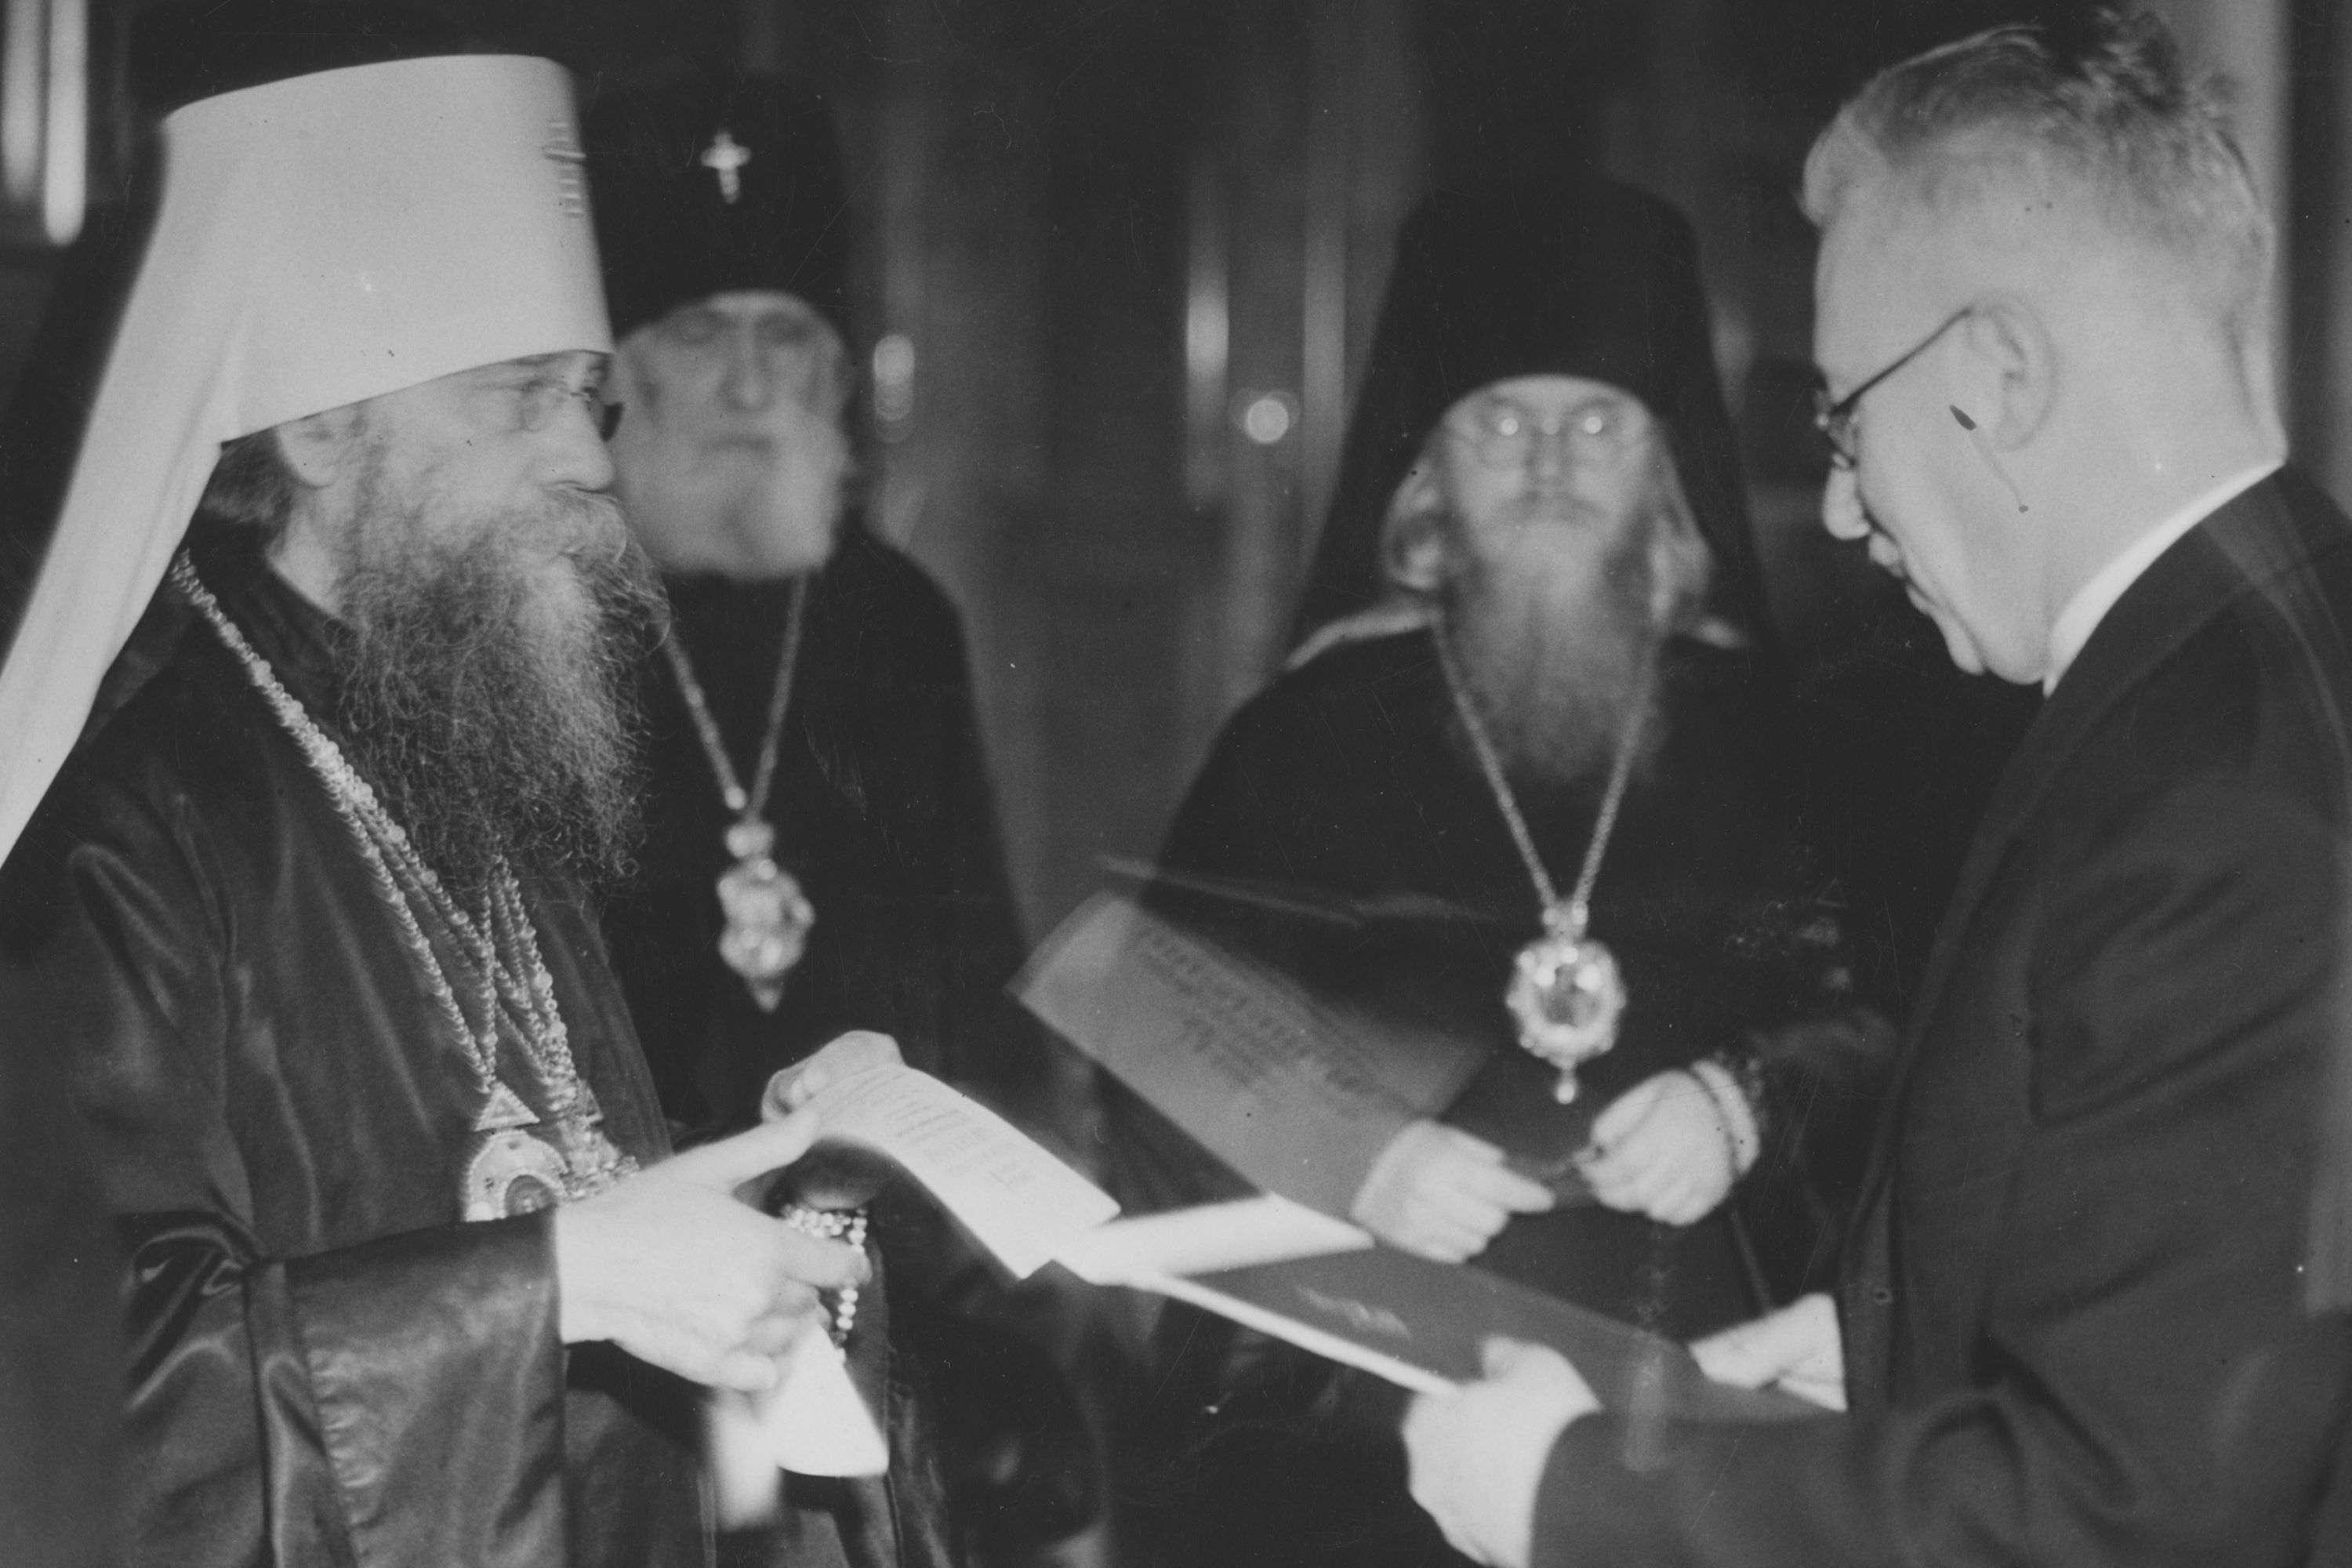 Warsaw, 1938: Metropolitan Dionysius Waledynski, together with Archbishop Theodosius Feodosiyev of Vilnius (background left) and Archbishop Alexius Gromadsky of Grodno (background right), hand over the internal statutes of the PAOC to the Polish Minister of Religious Affairs and Education, Professor Wojciech Swietoslawski. After the autocephaly was proclaimed in 1925, the most important act in relations with the Polish state was the decree of President Ignacy Moscicki of 18th November 1938, which granted full legal regulation to the PAOC. - фото 132318